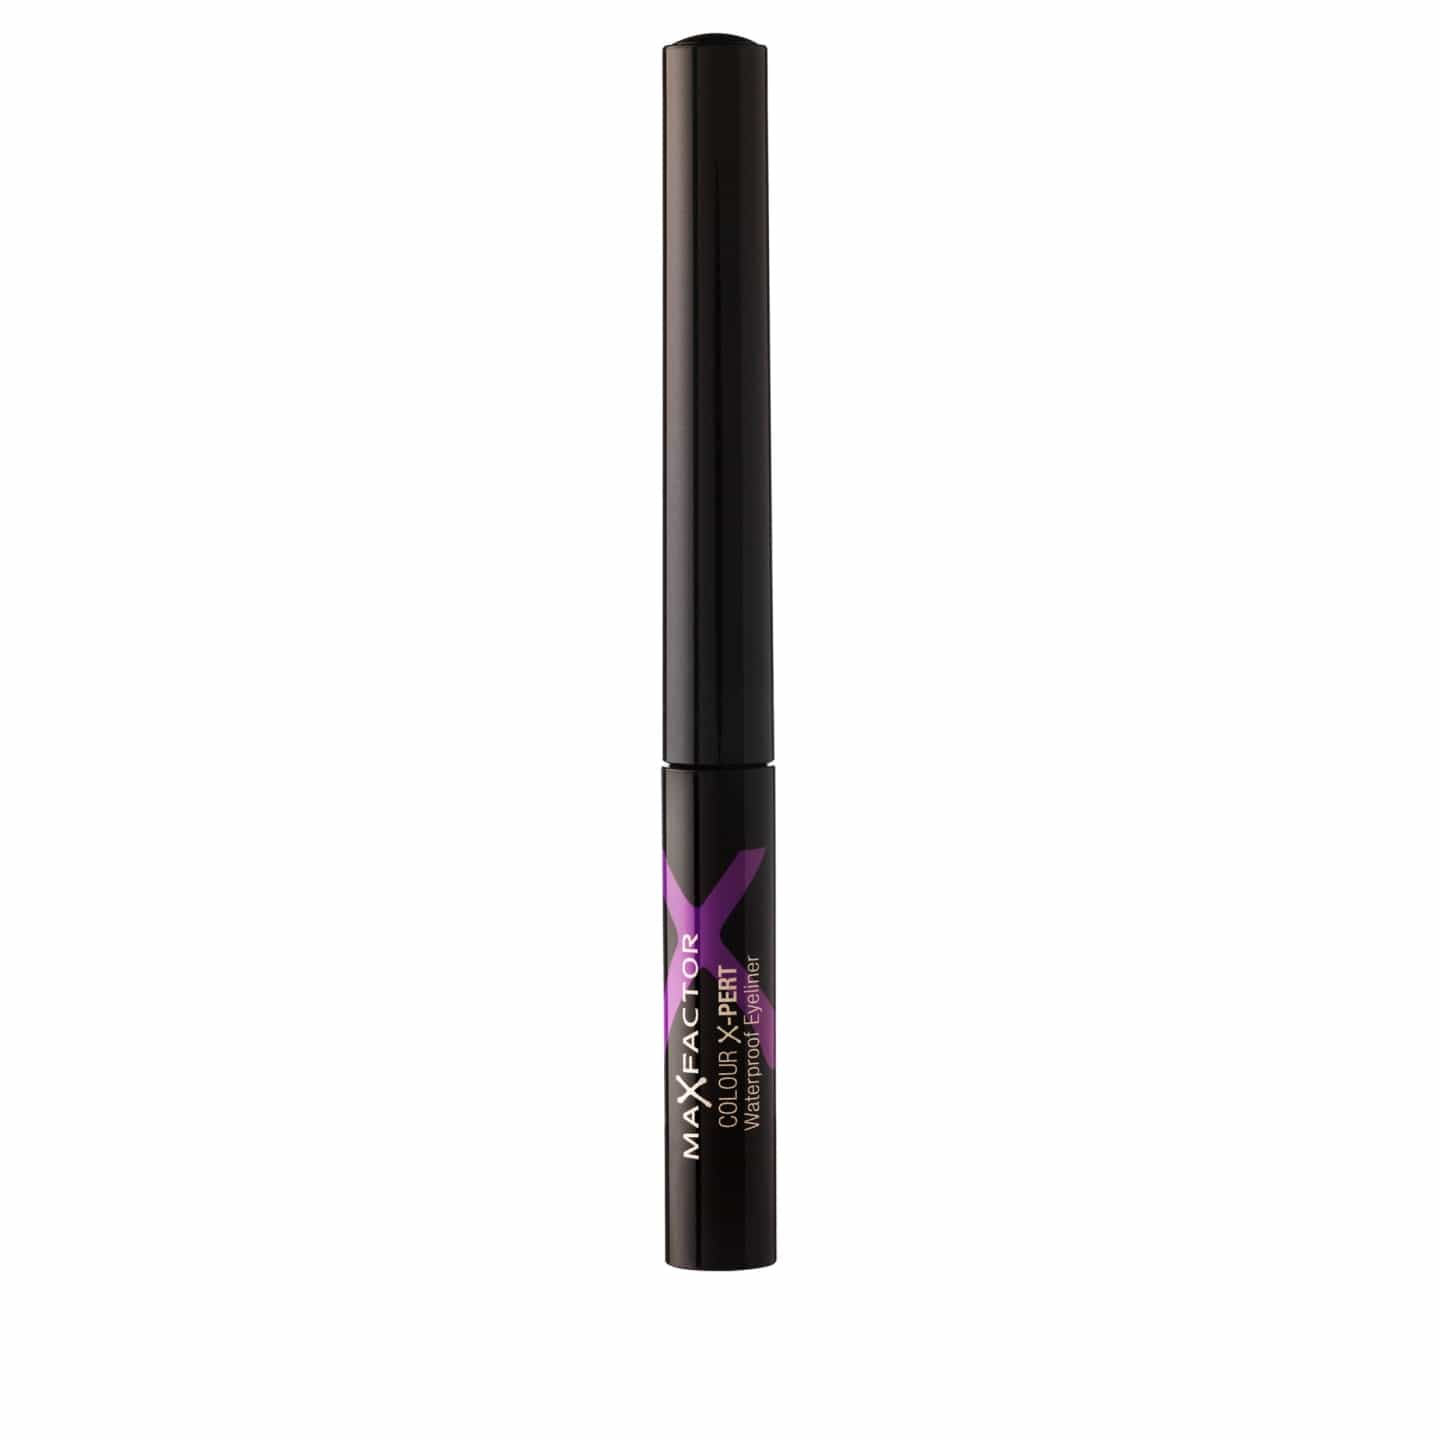 Colour X-Pert Waterproof Eye Liner | Max Factor - Give Us Beauty